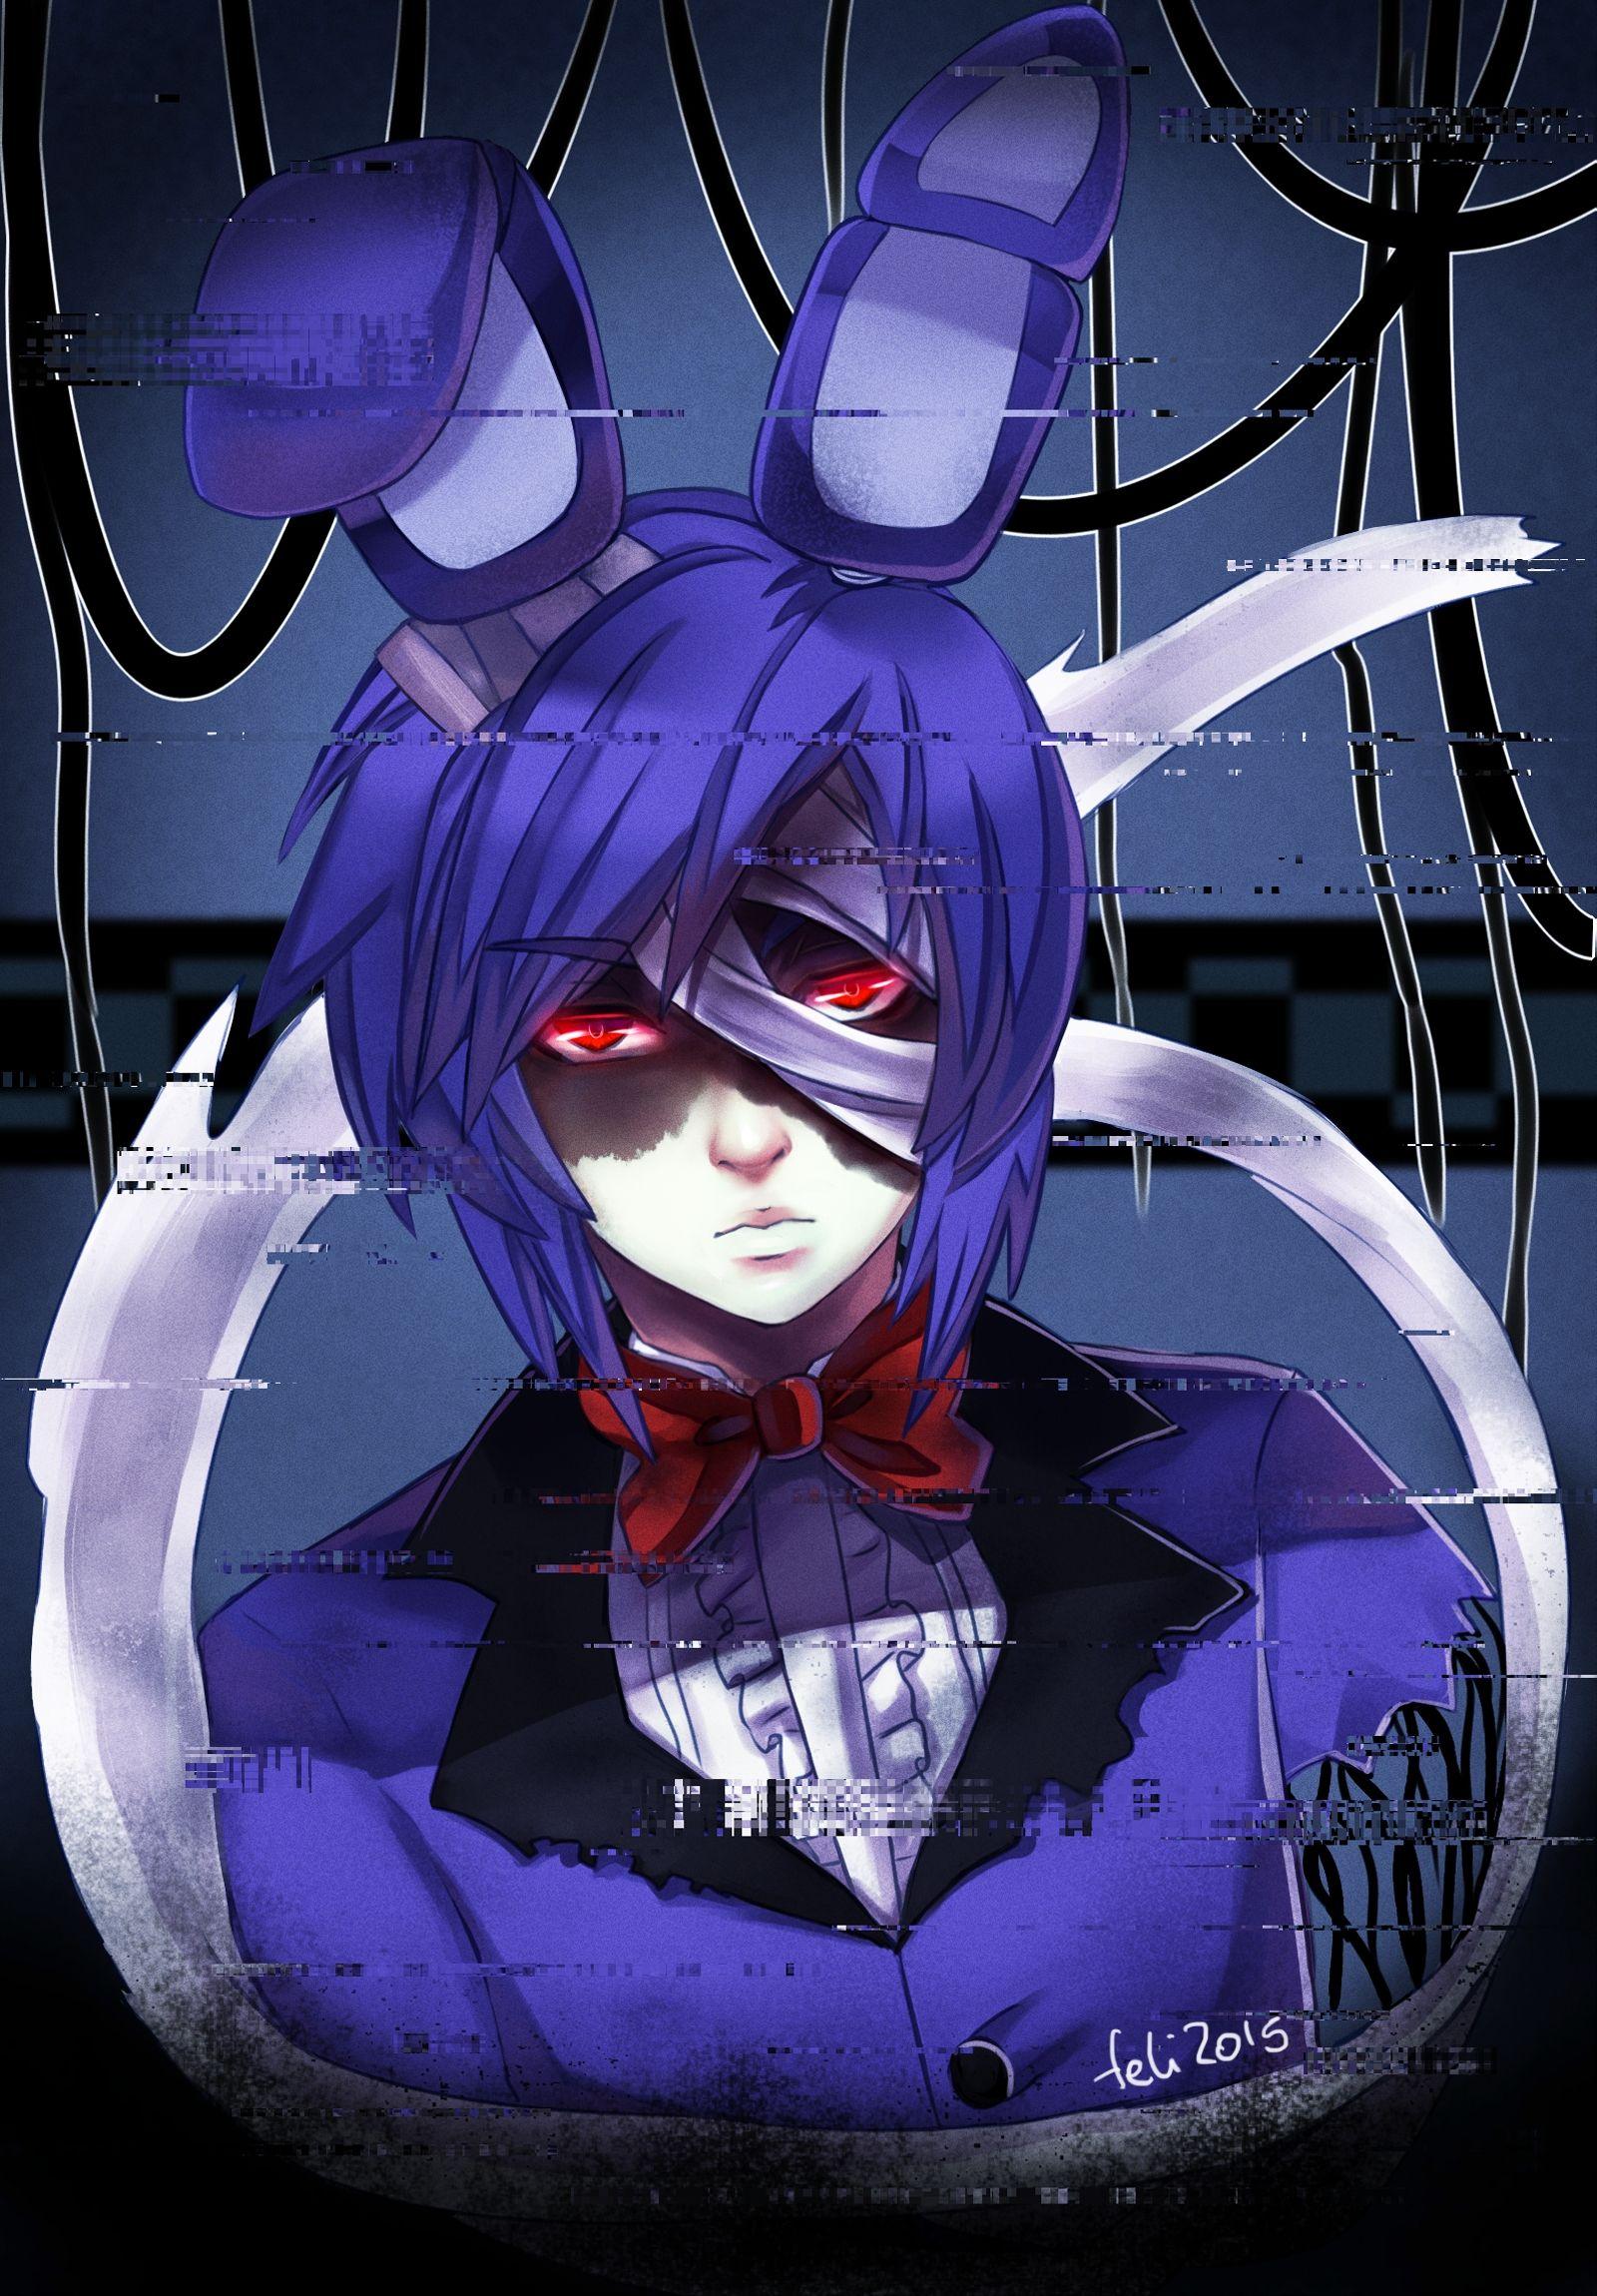 Anime picture five nights at freddy's 799x1024 500383 de